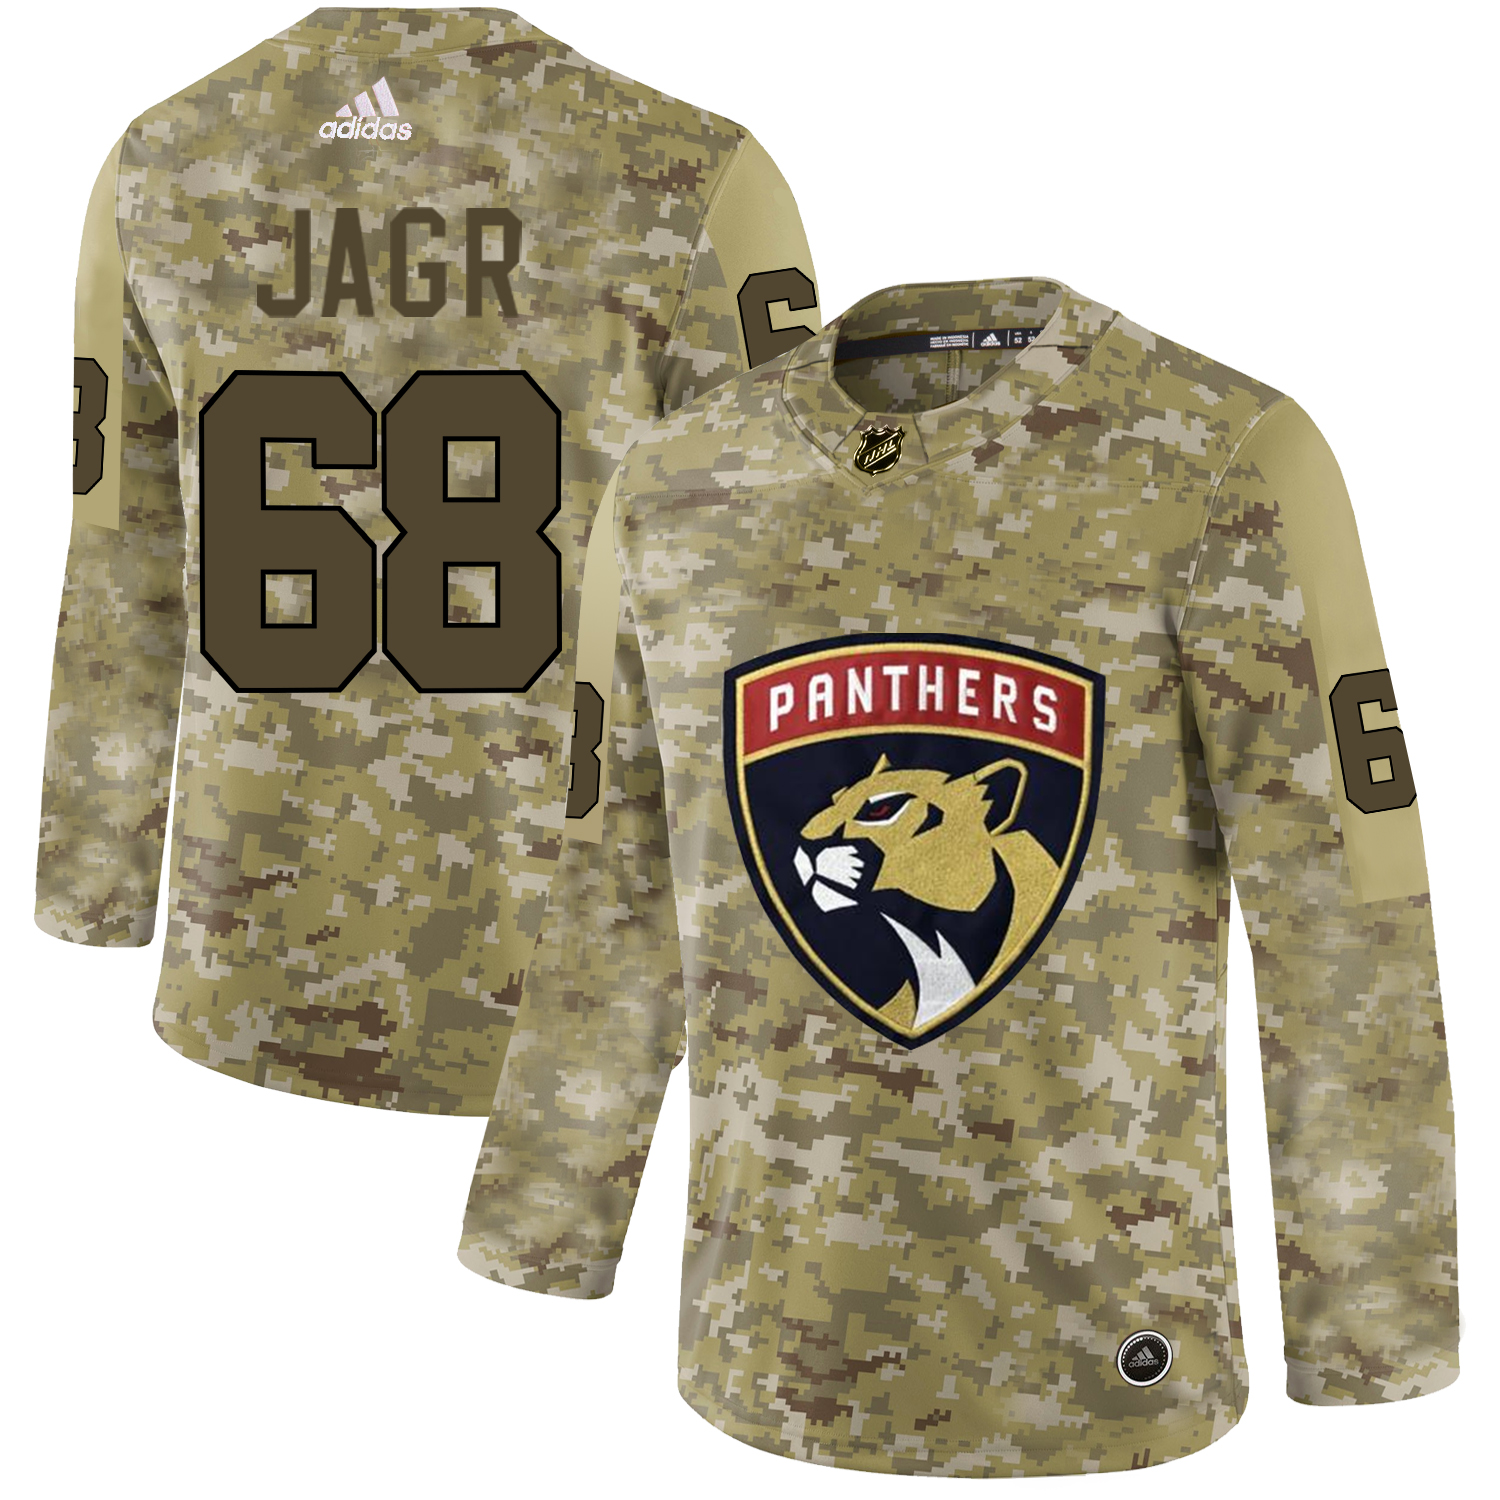 Adidas Panthers #68 Jaromir Jagr Camo Authentic Stitched NHL Jersey